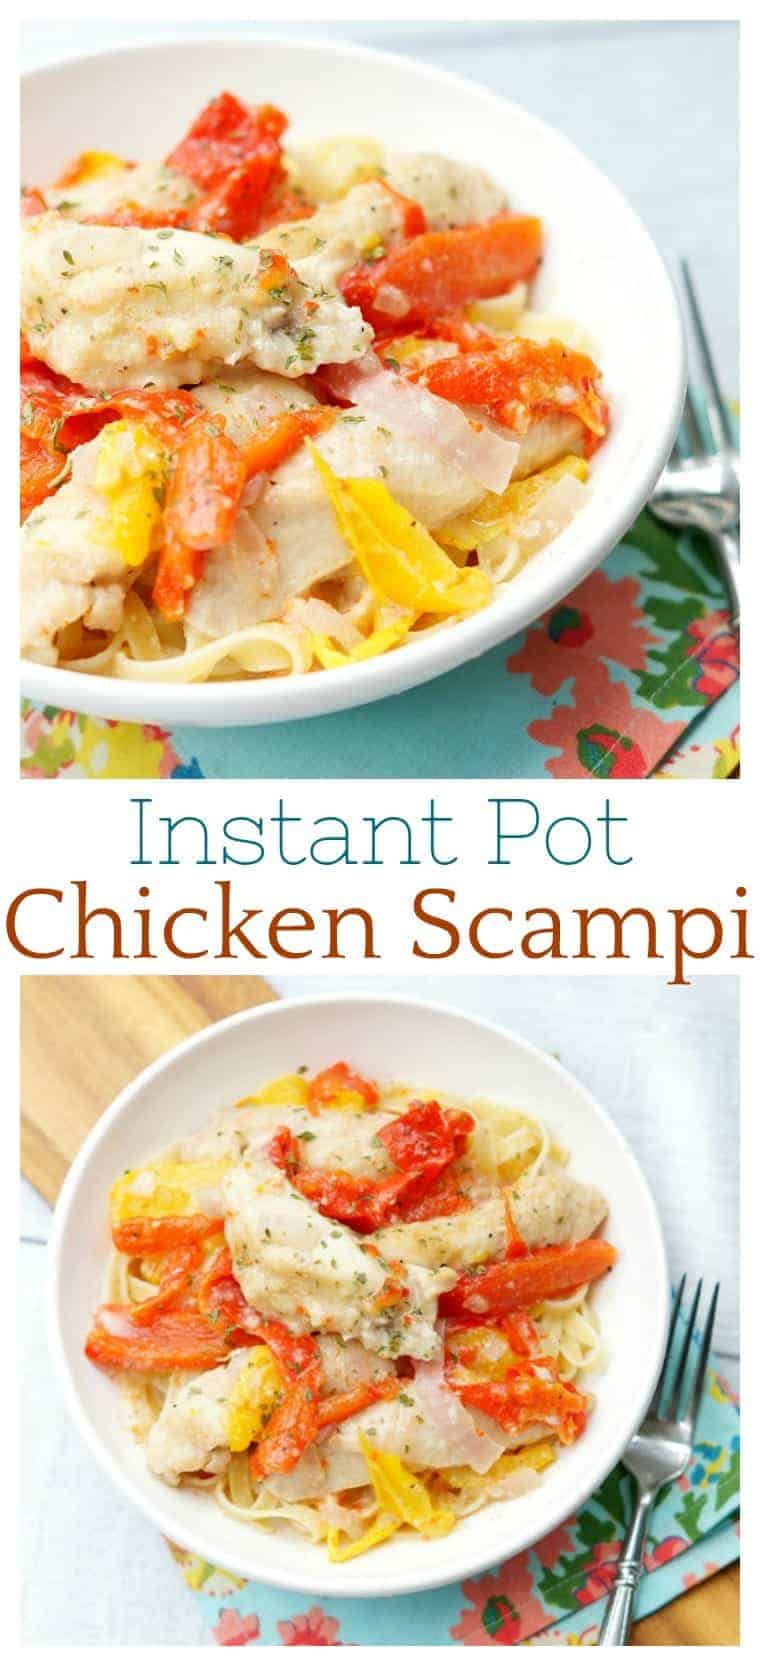 Instant Pot Chicken Scampi is a delicious, restaurant quality meal, made in at home in your pressure cooker in just minutes! An easy dinner your family will love!